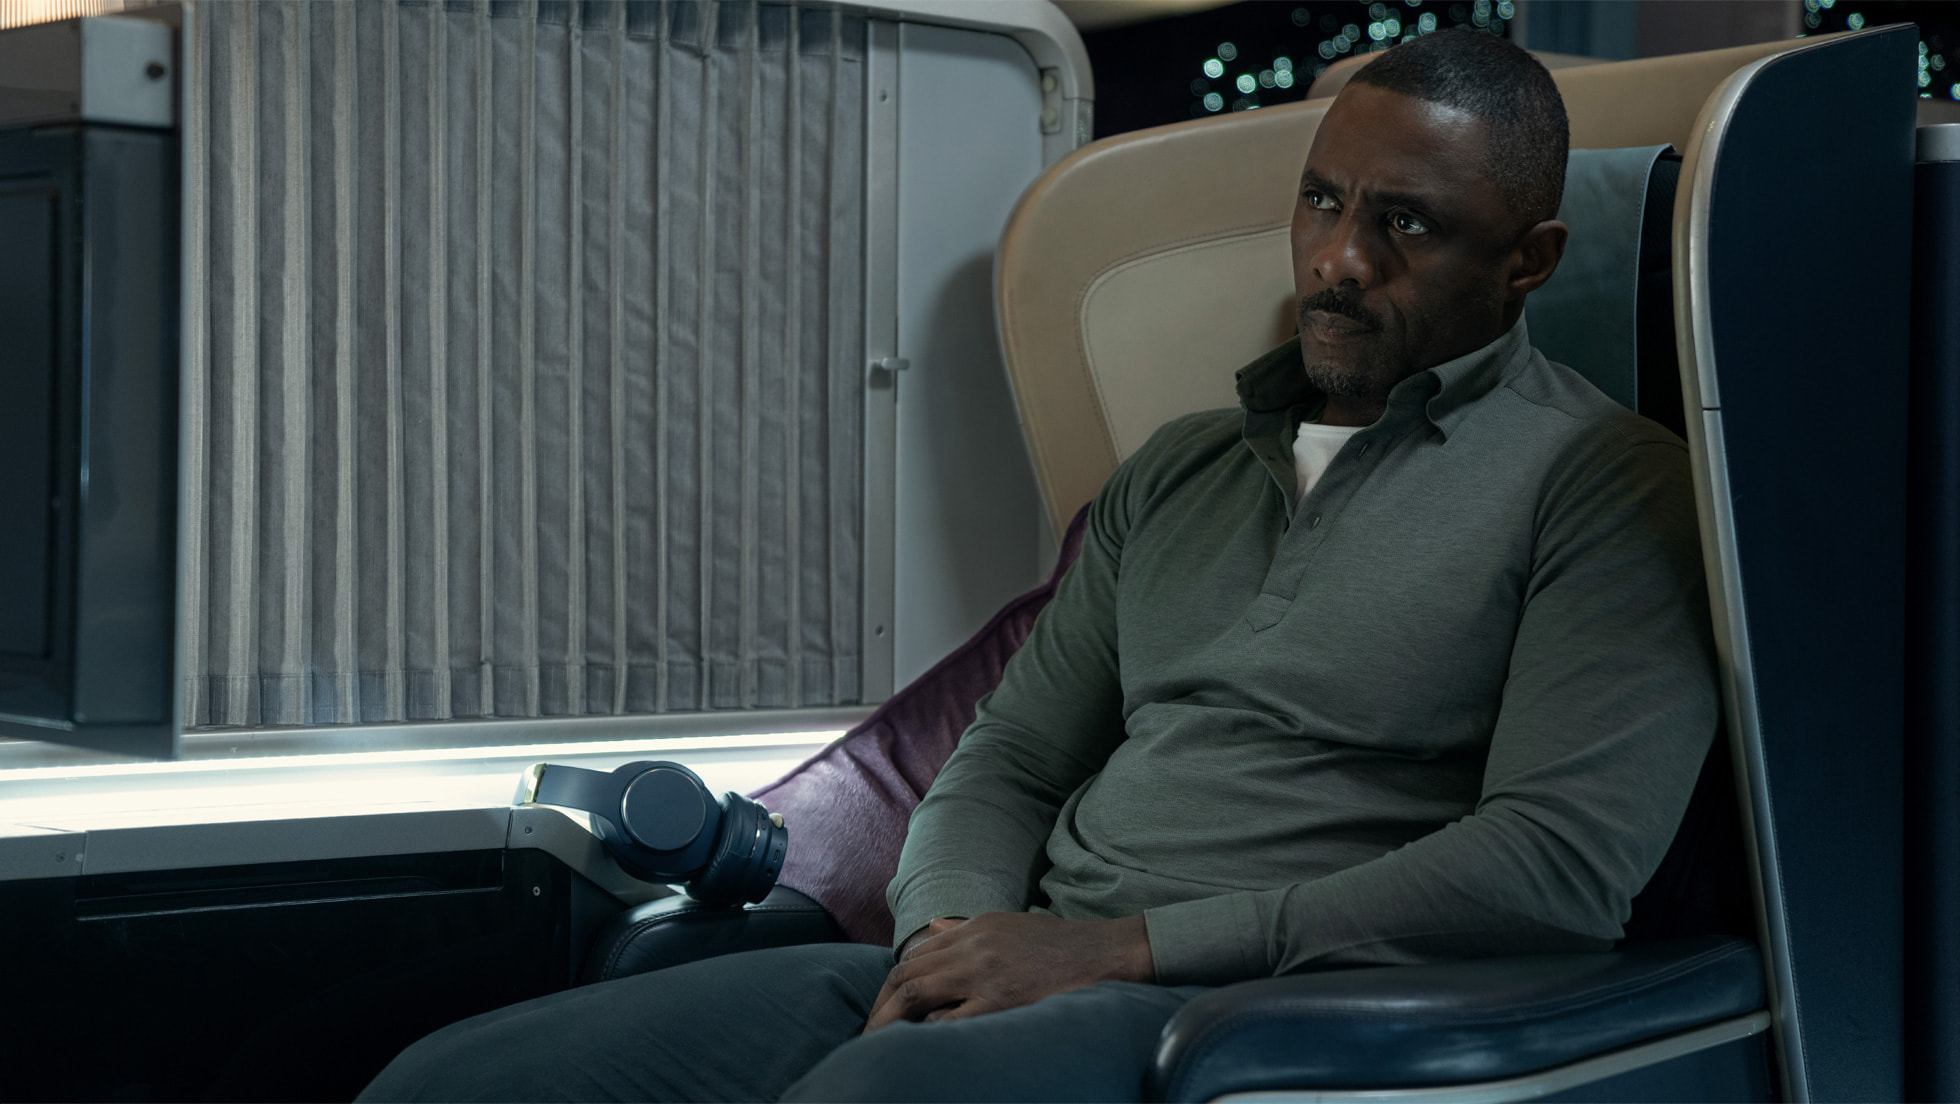 How to watch Hijack stream the Idris Elba plane thriller What to Watch